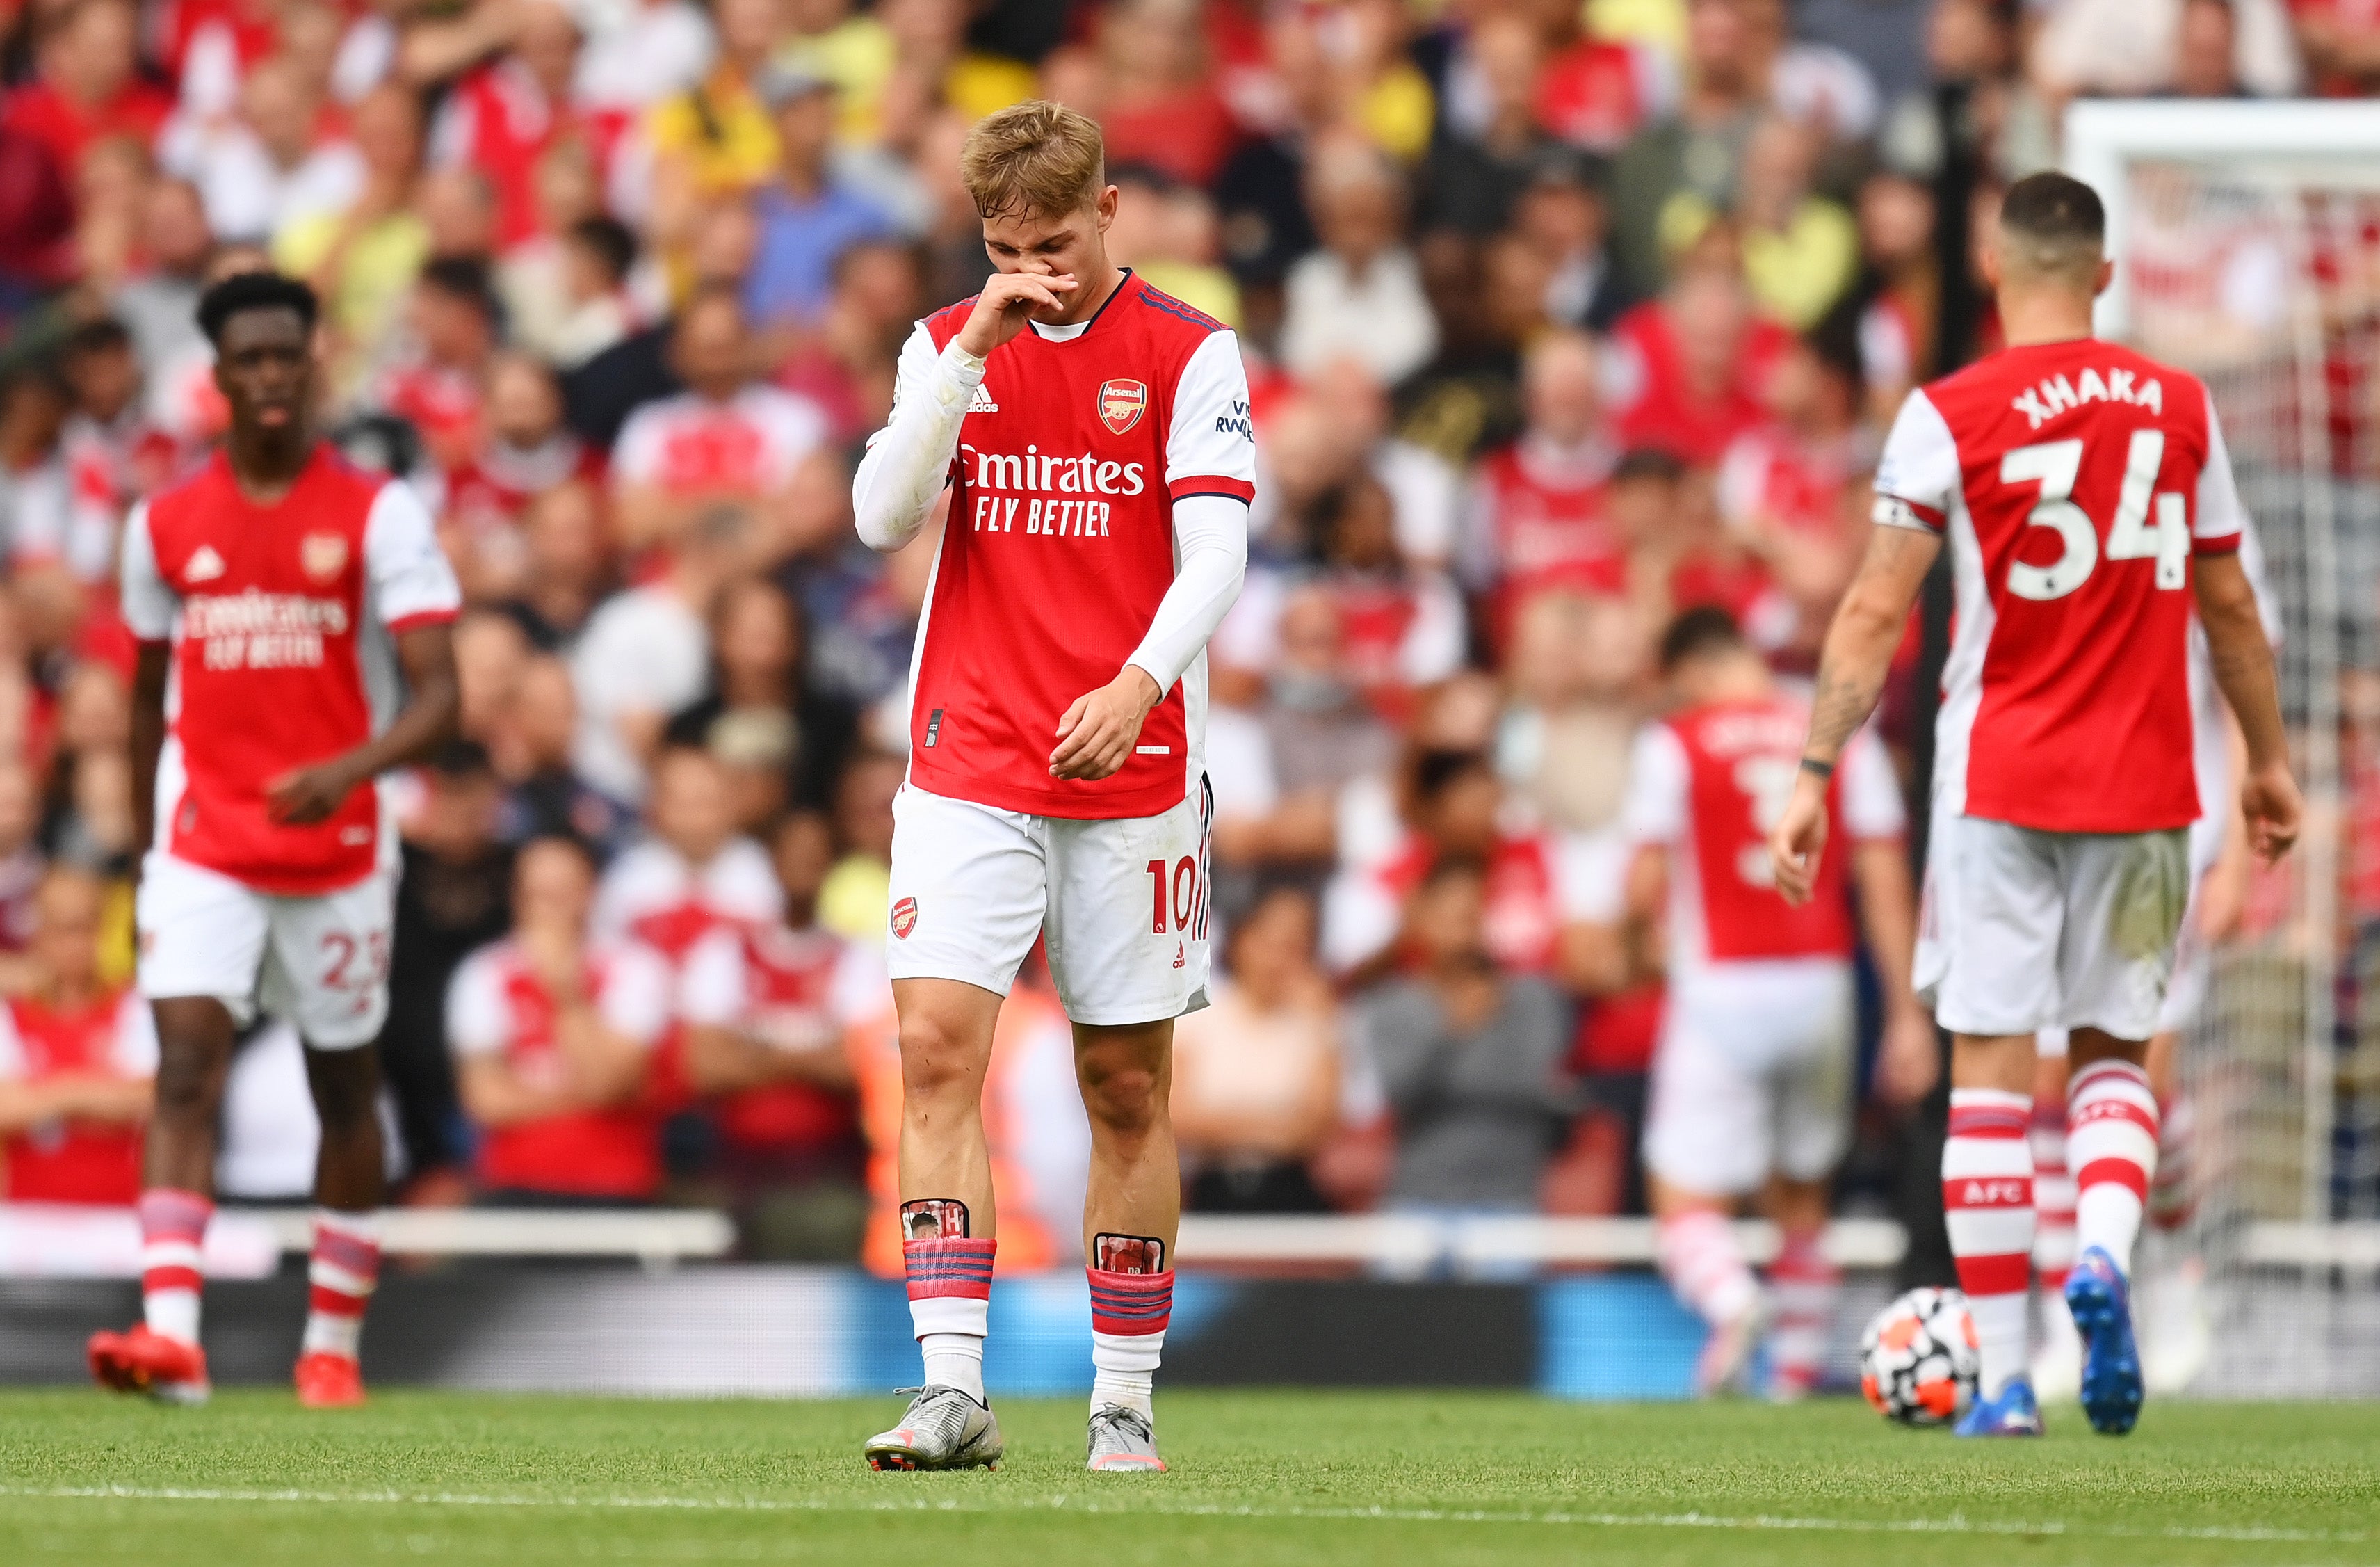 Arsenal have suffered a disastrous start to the season